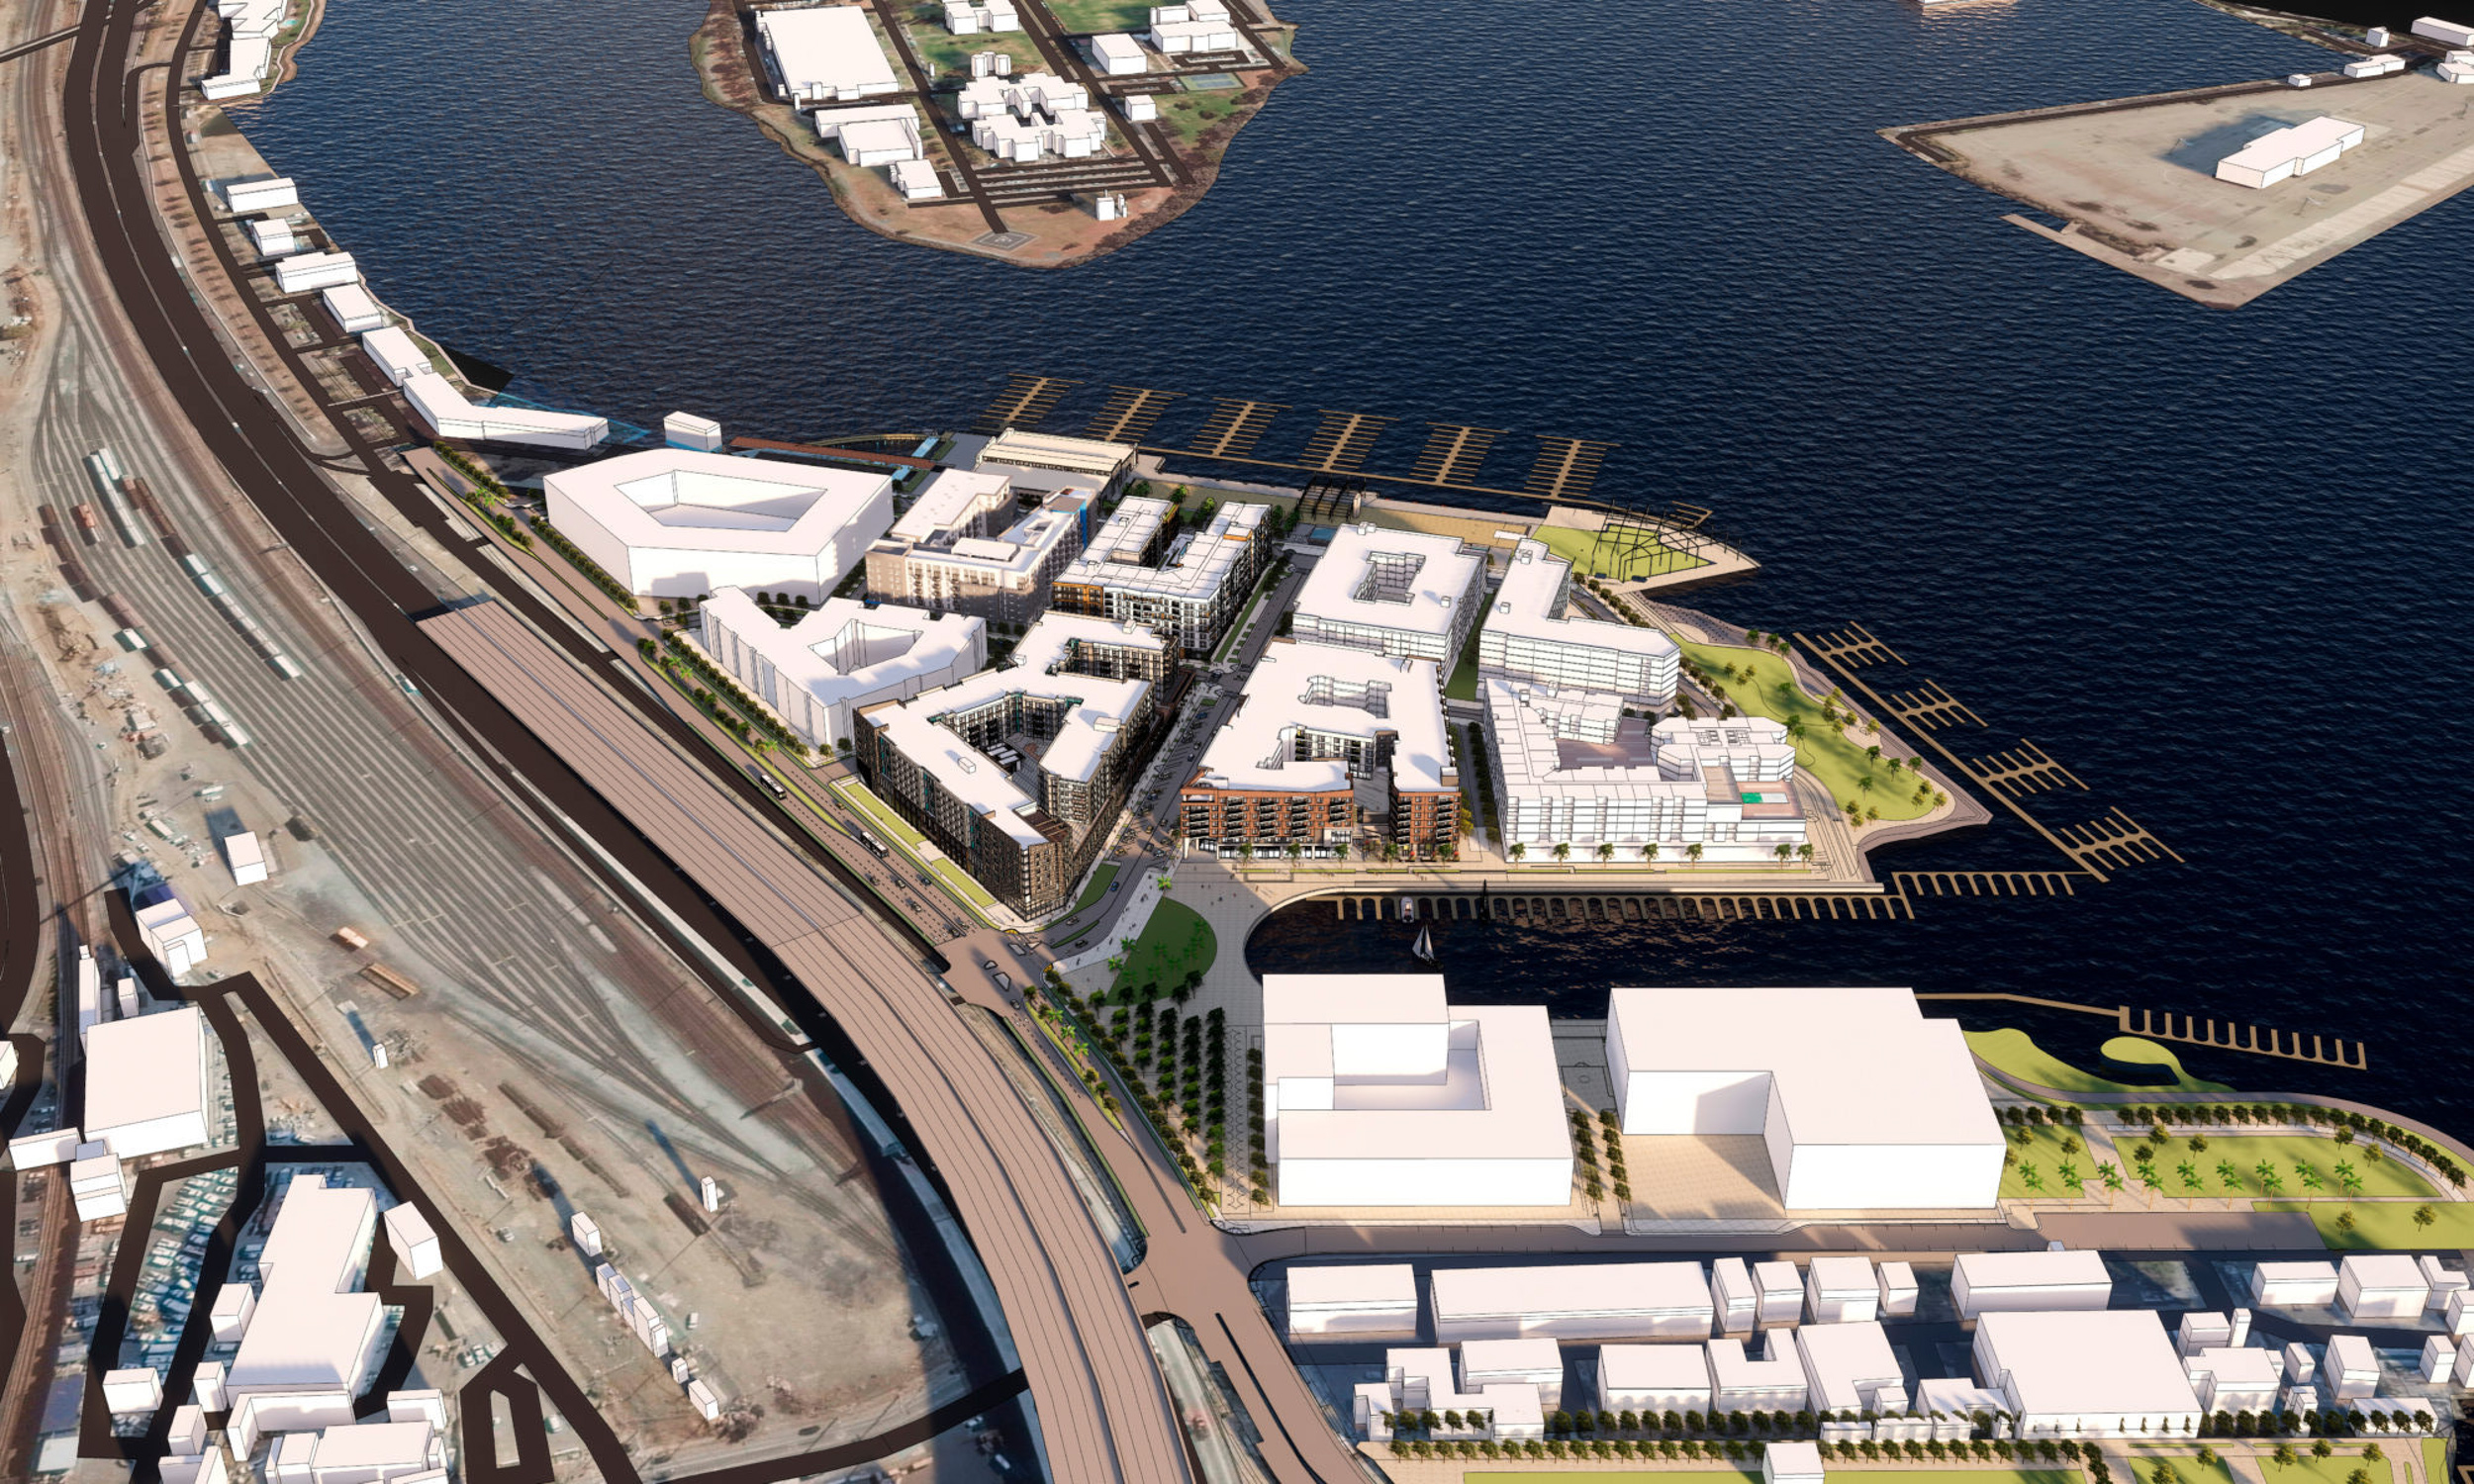 Brooklyn Basin aerial view focusing on Parcel H, rendering by TCA Architects